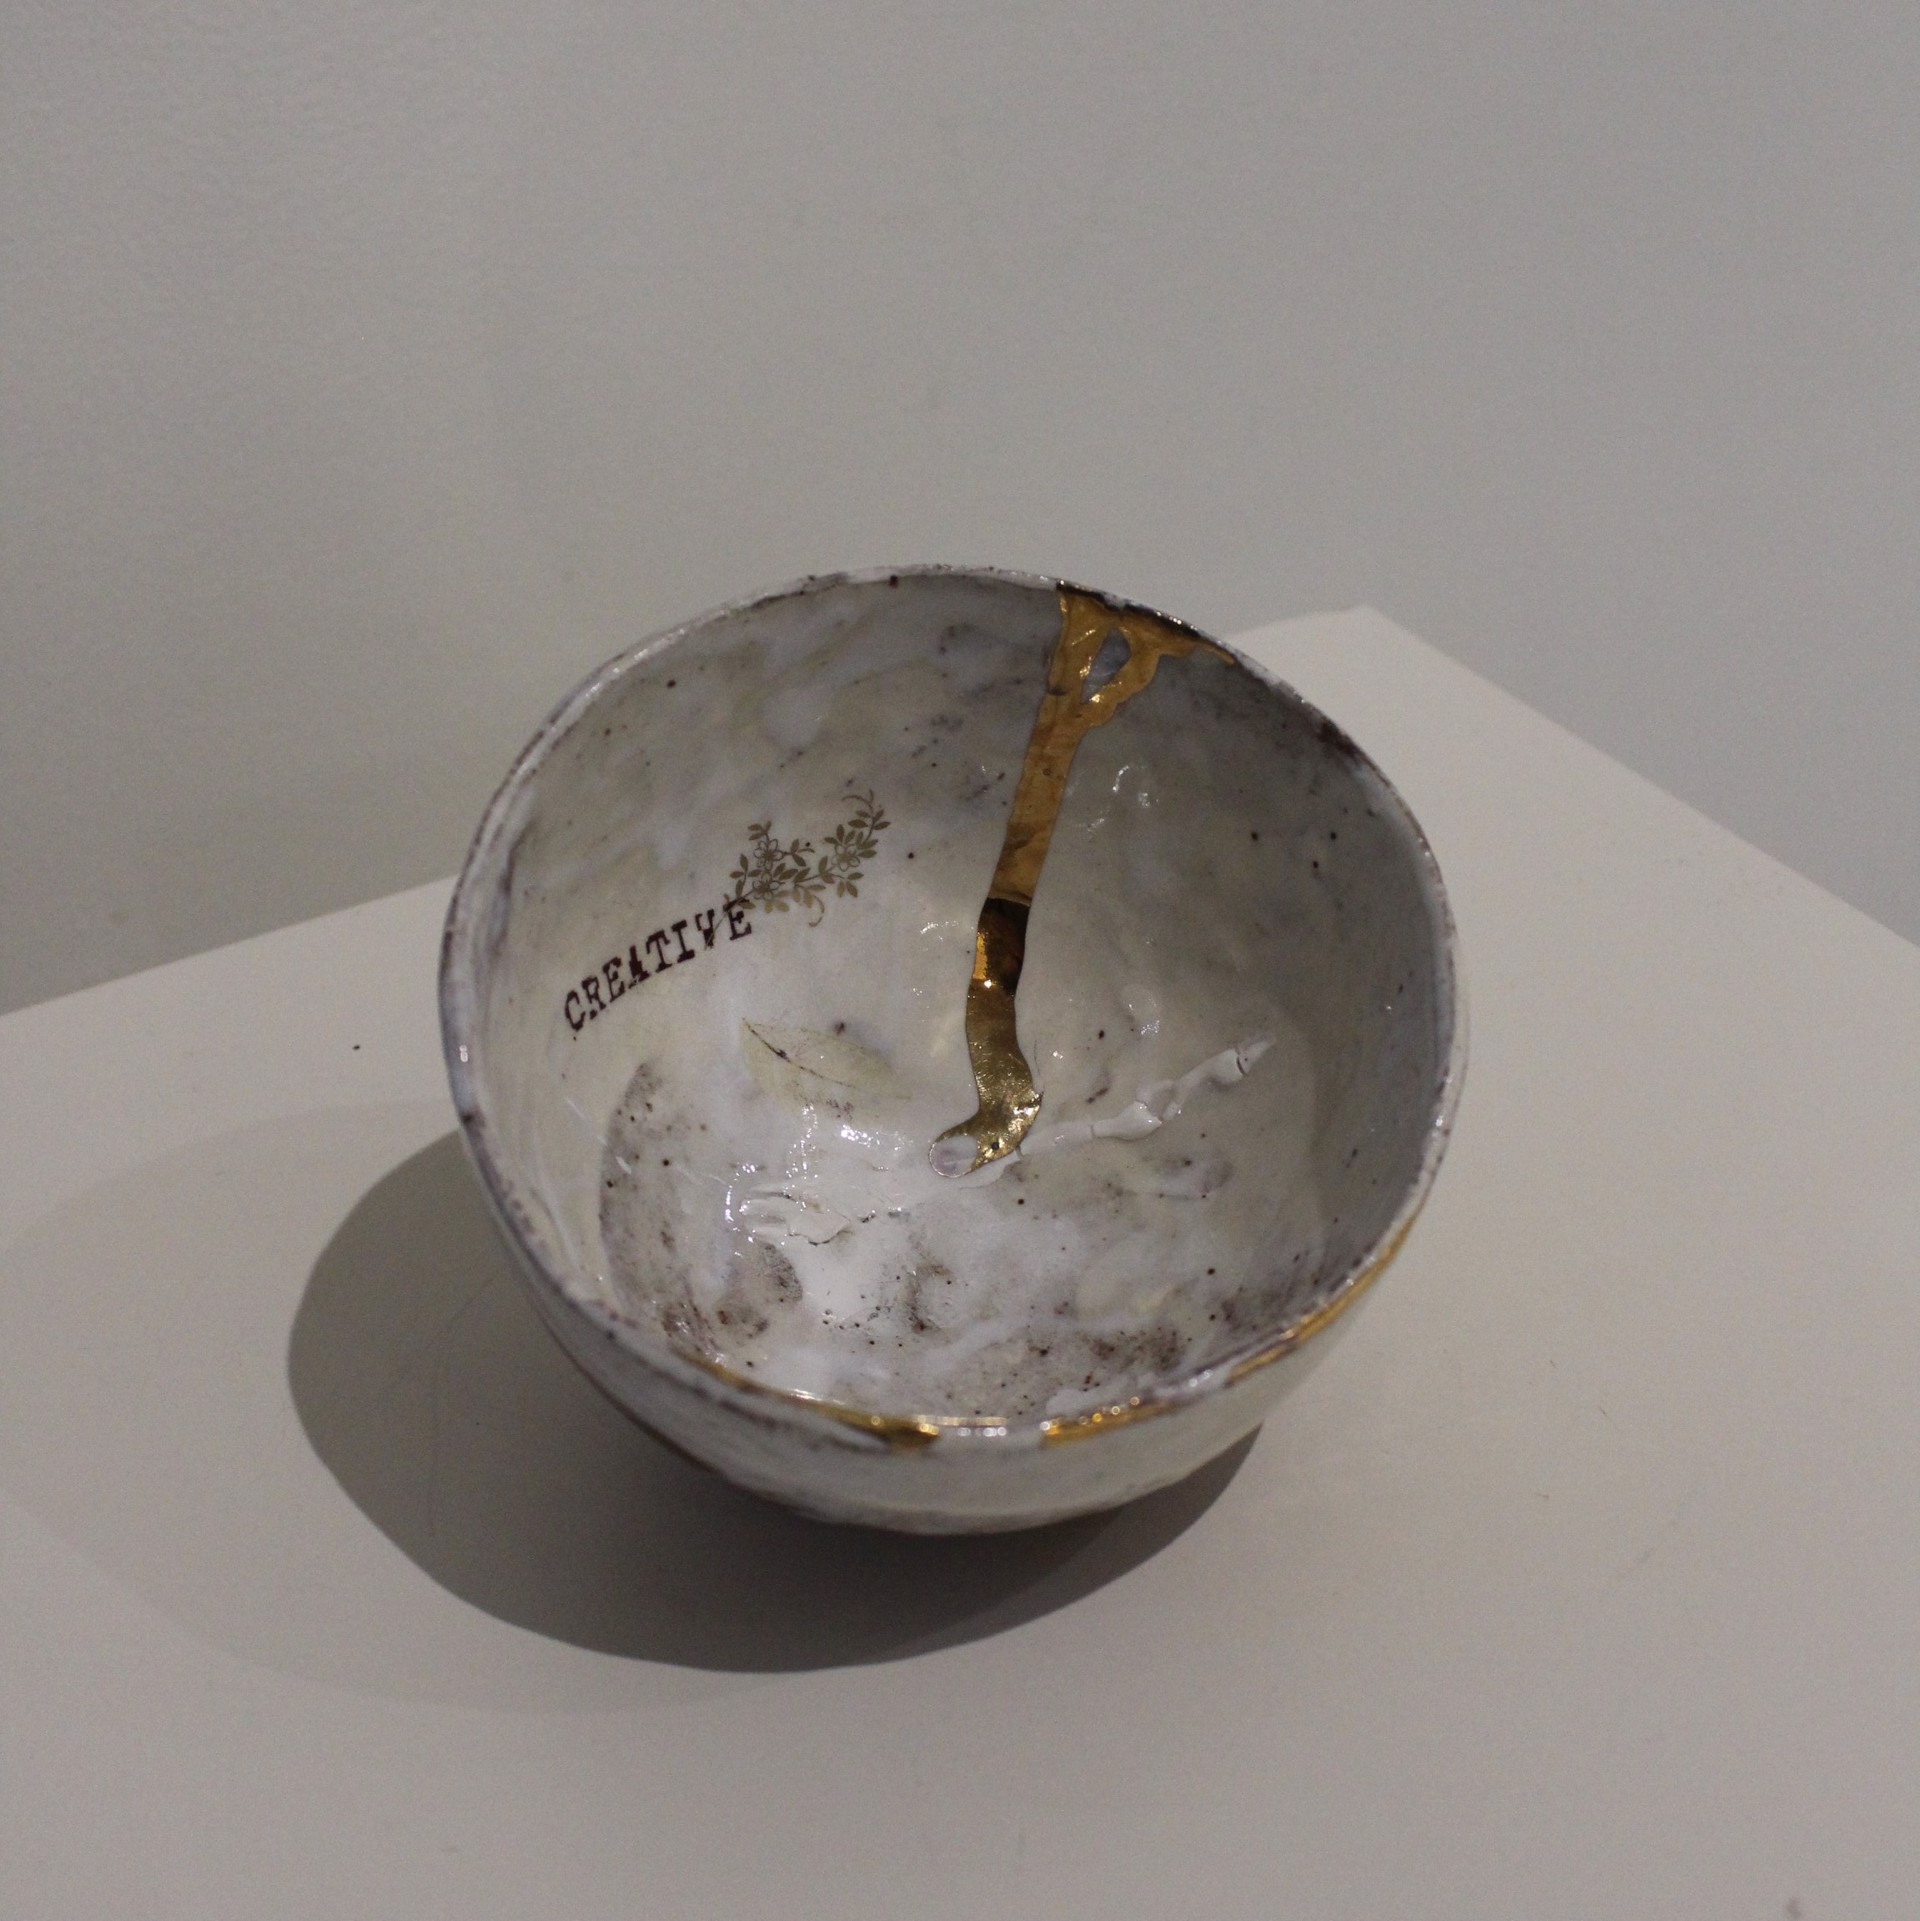 Tea Bowl 3 (creative) by Therese Knowles